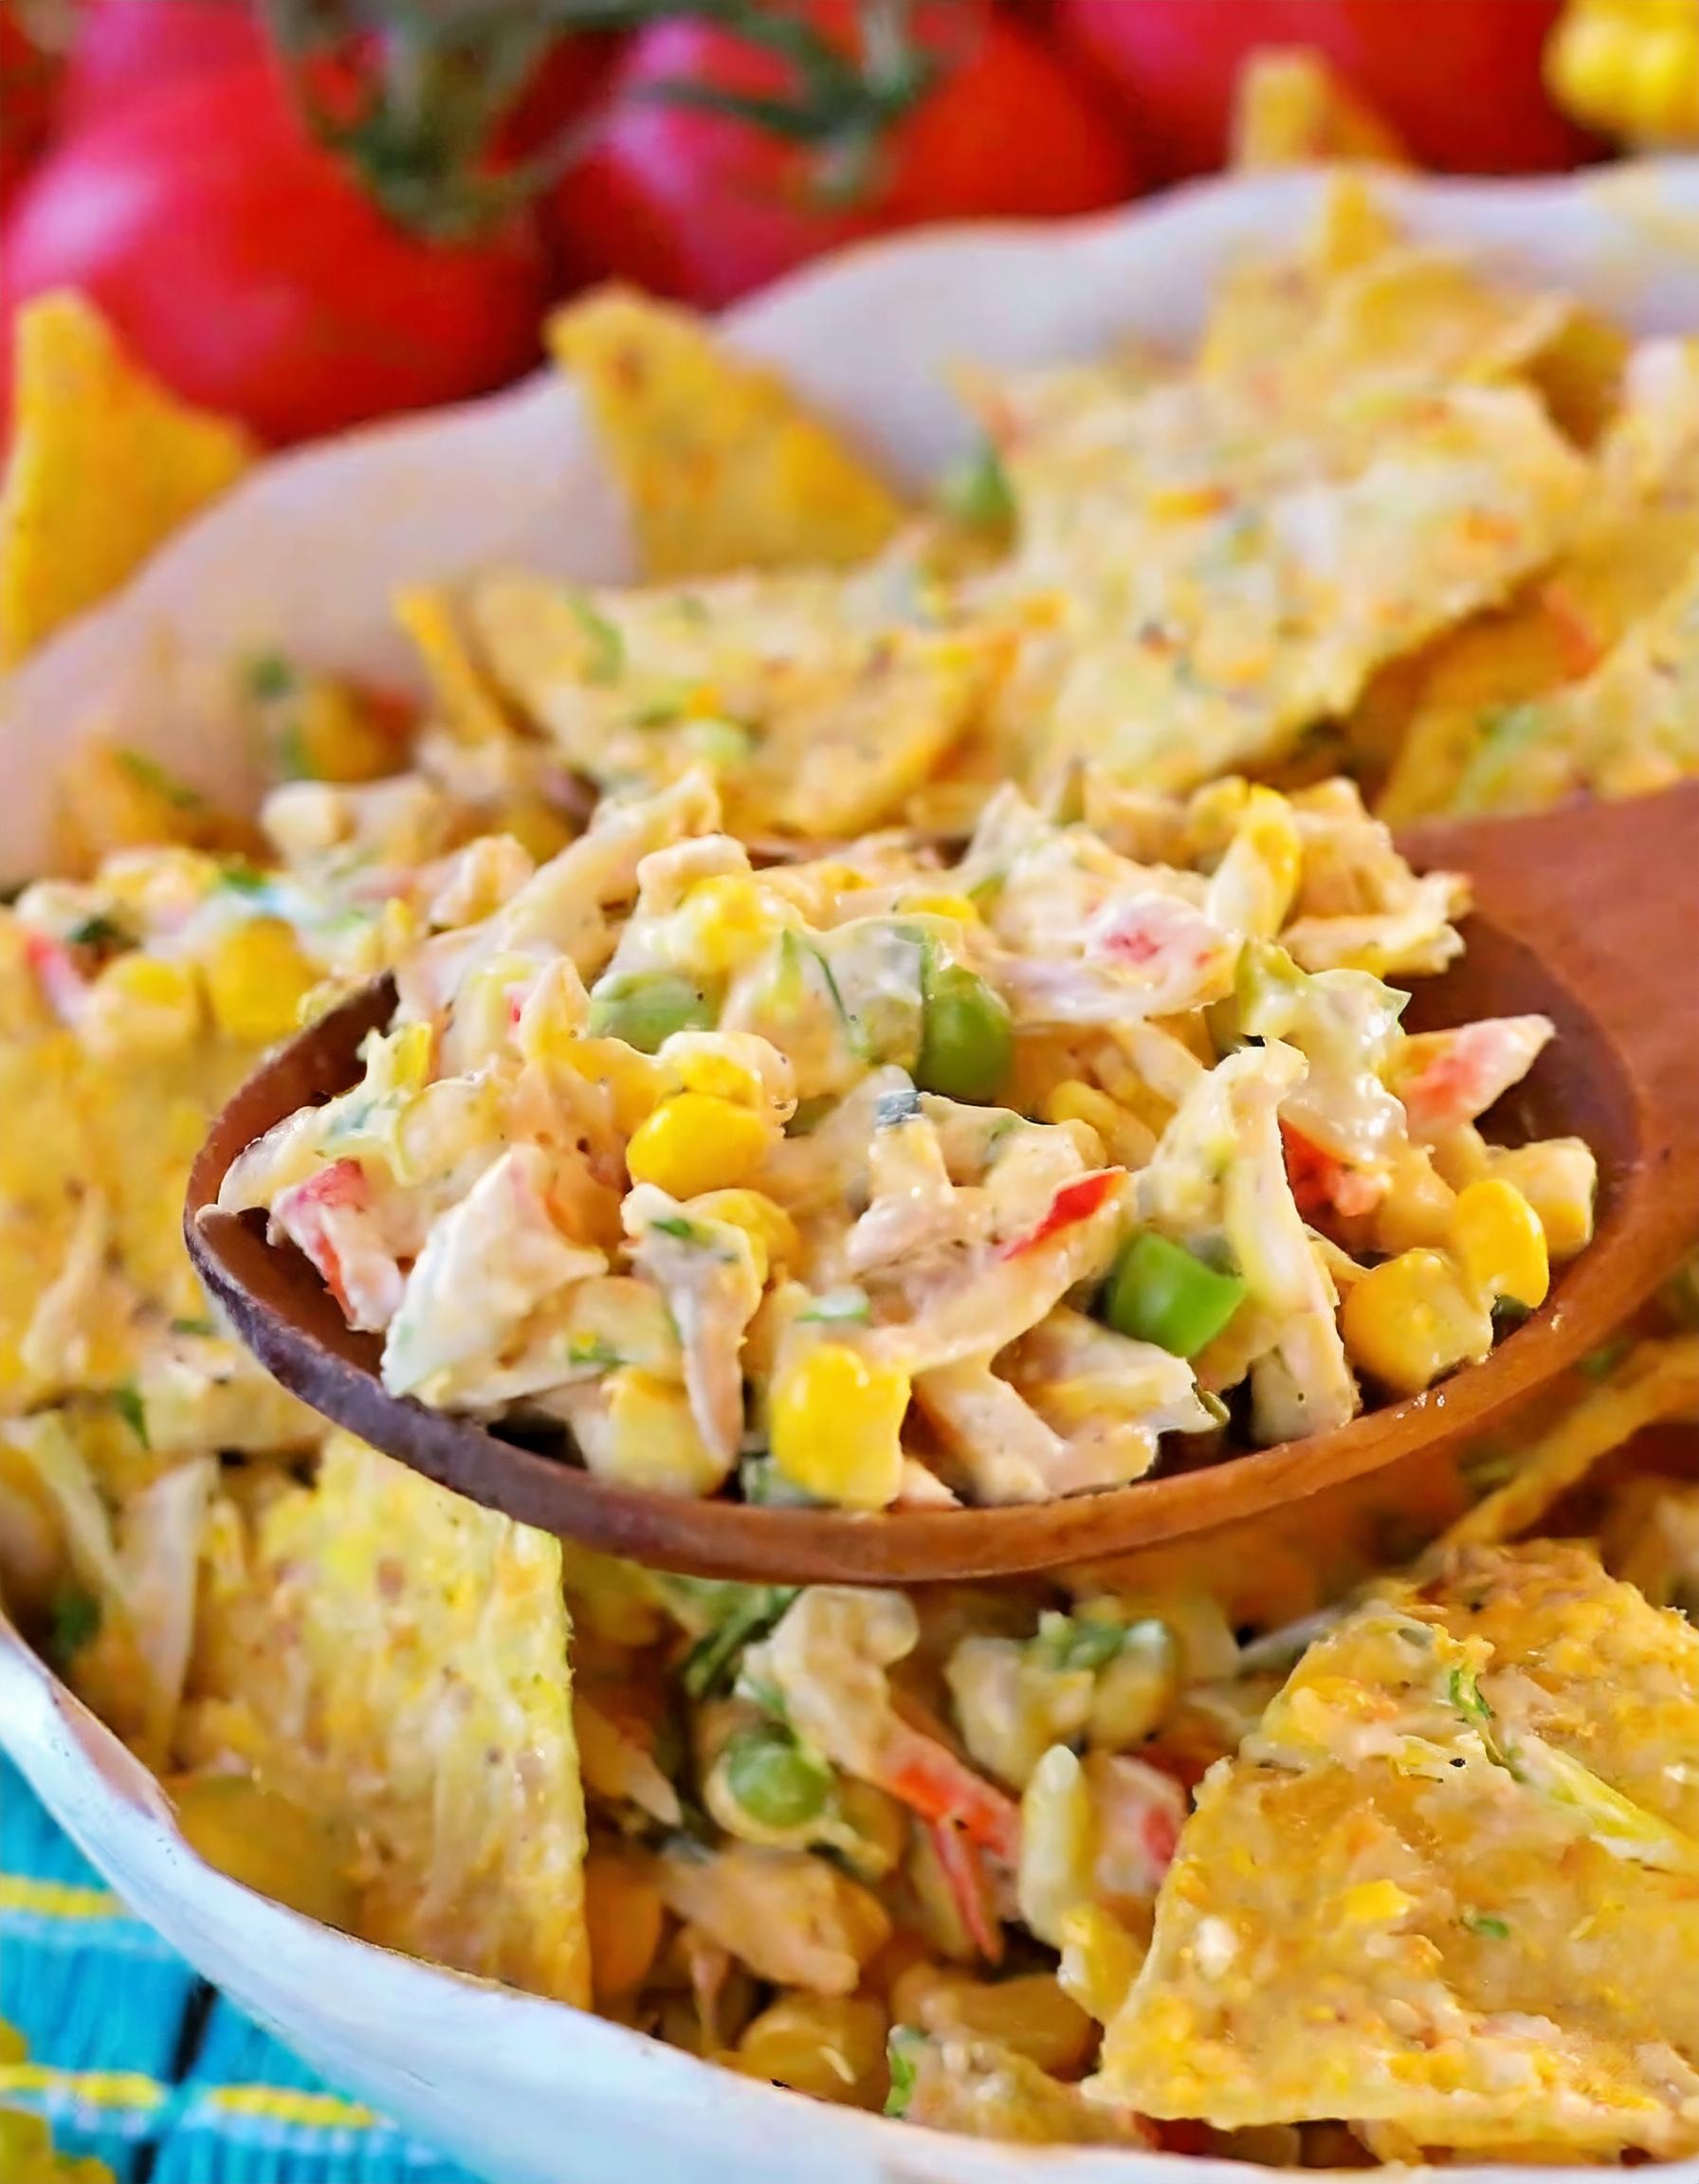 Crunchy-Corn-Salad-with-Fritos-Chips-1